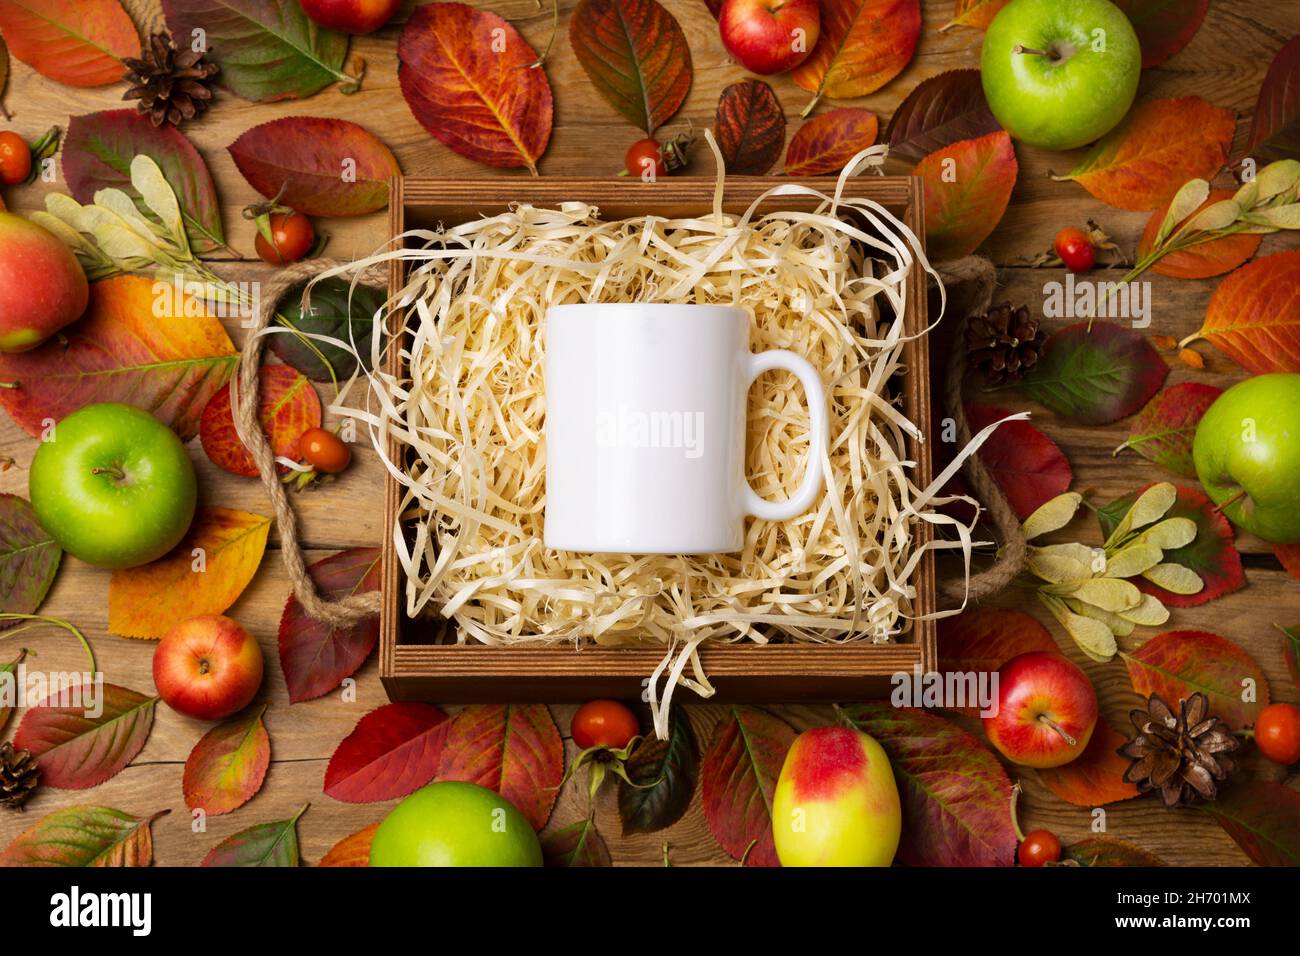 White coffee mug rustic mockup with fall leaves, apples and pine cones. Empty mug mock up for design promotion, styled template Stock Photo